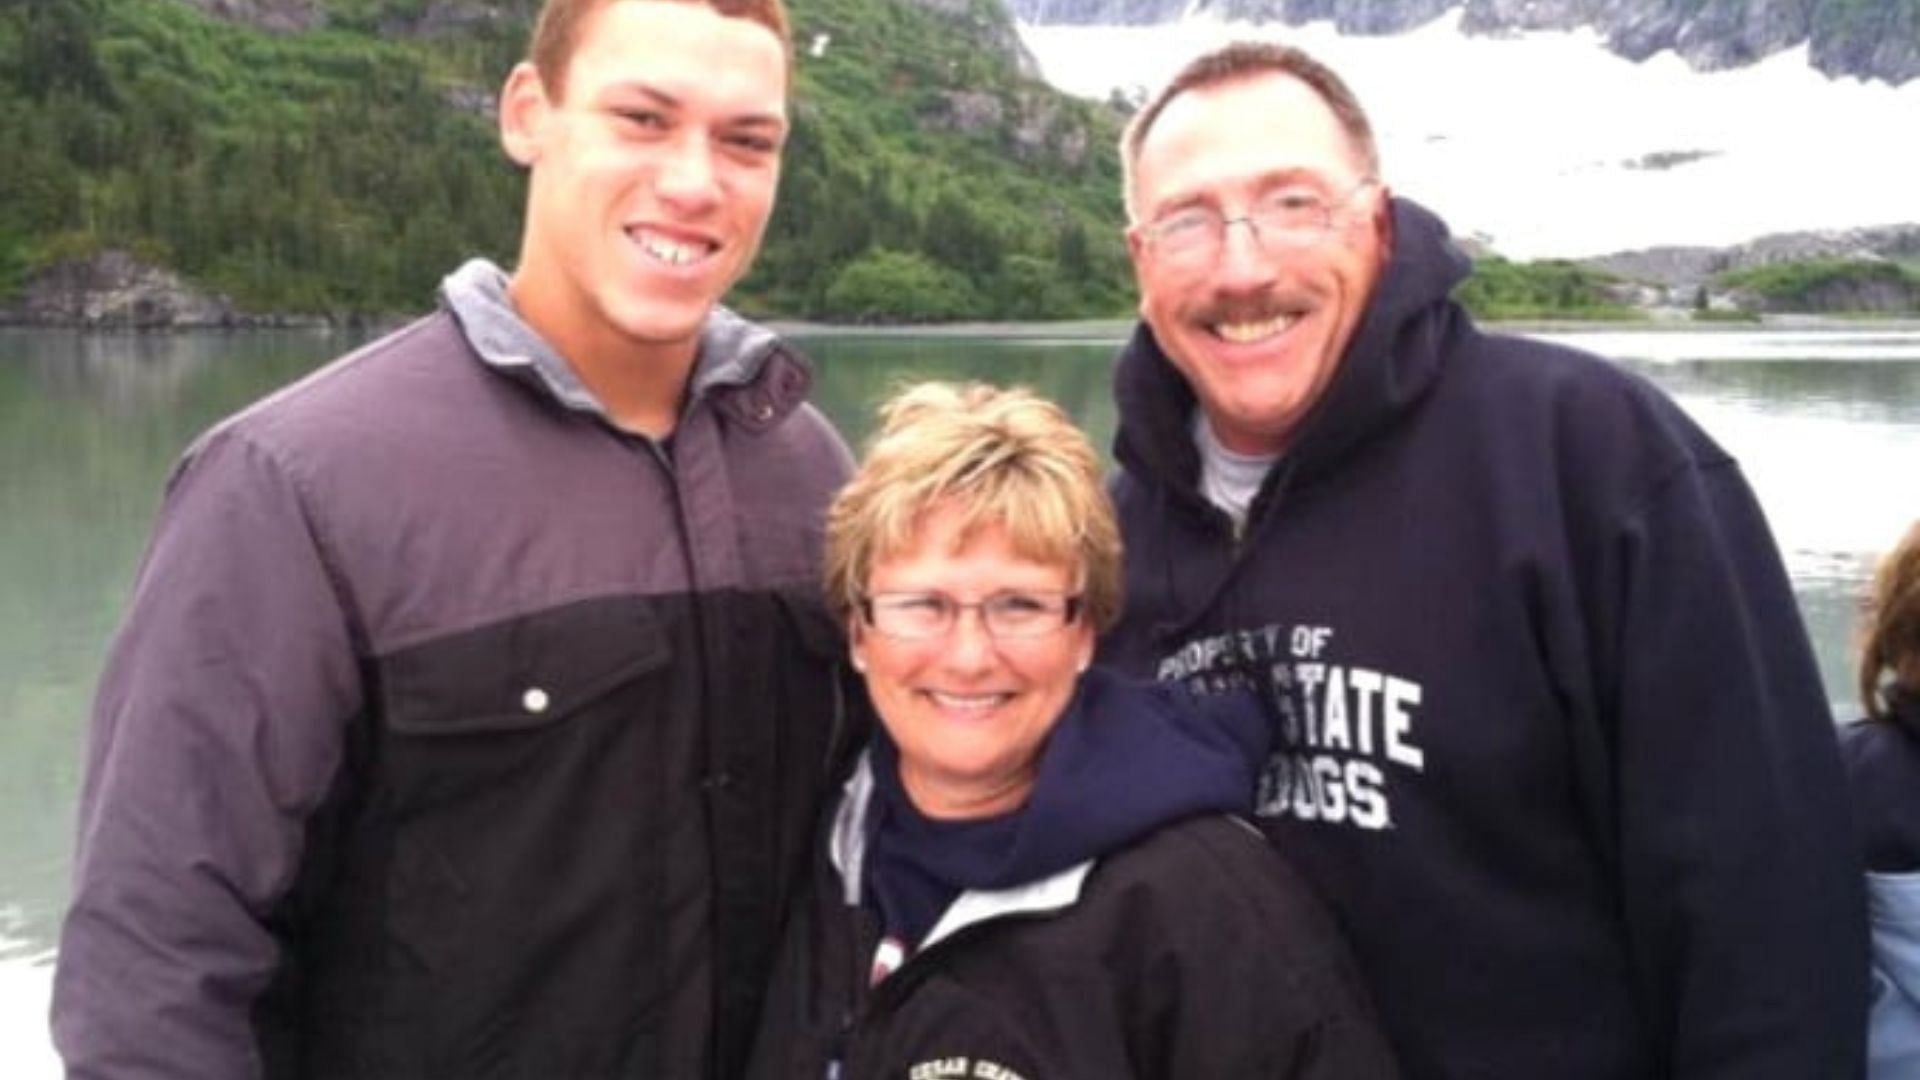 Aaron Judge with his mother Patty Judge